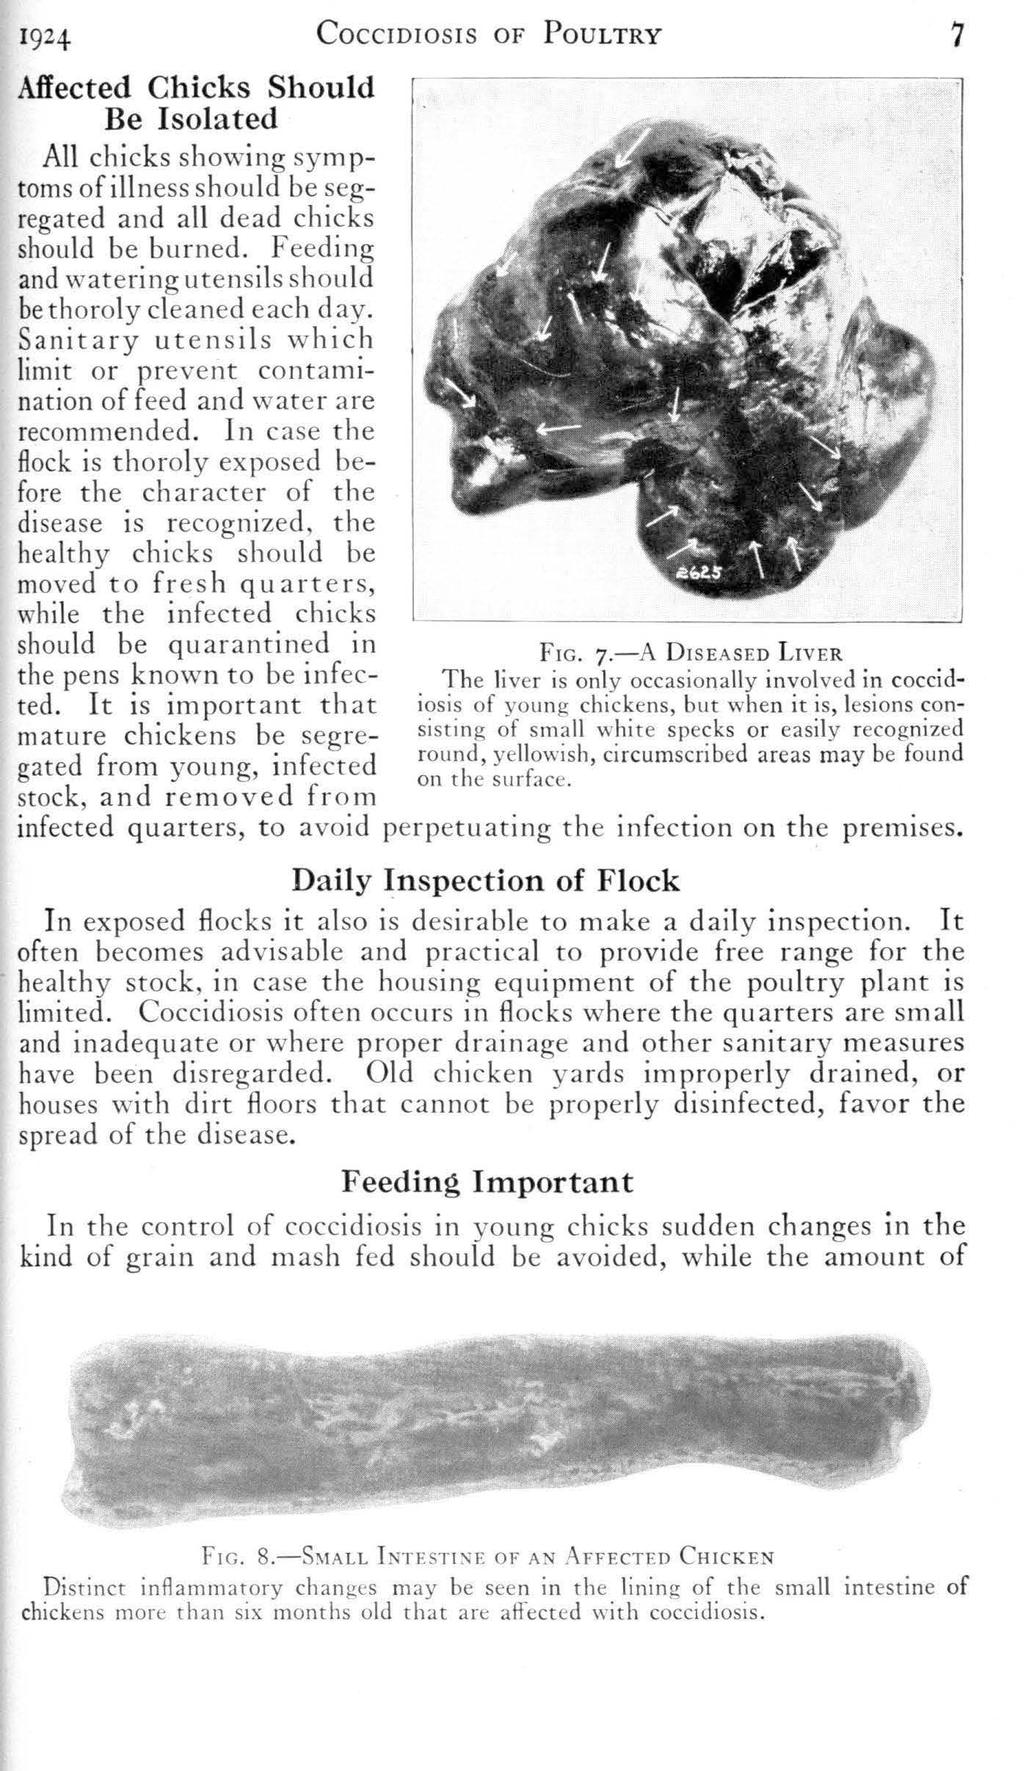 1924 CocciDIOSIS of PouLTRY 7 Affected Chicks Should Be Isolated All chicks showing symptoms ofillness should be segregated and all dead chicks should be burned.